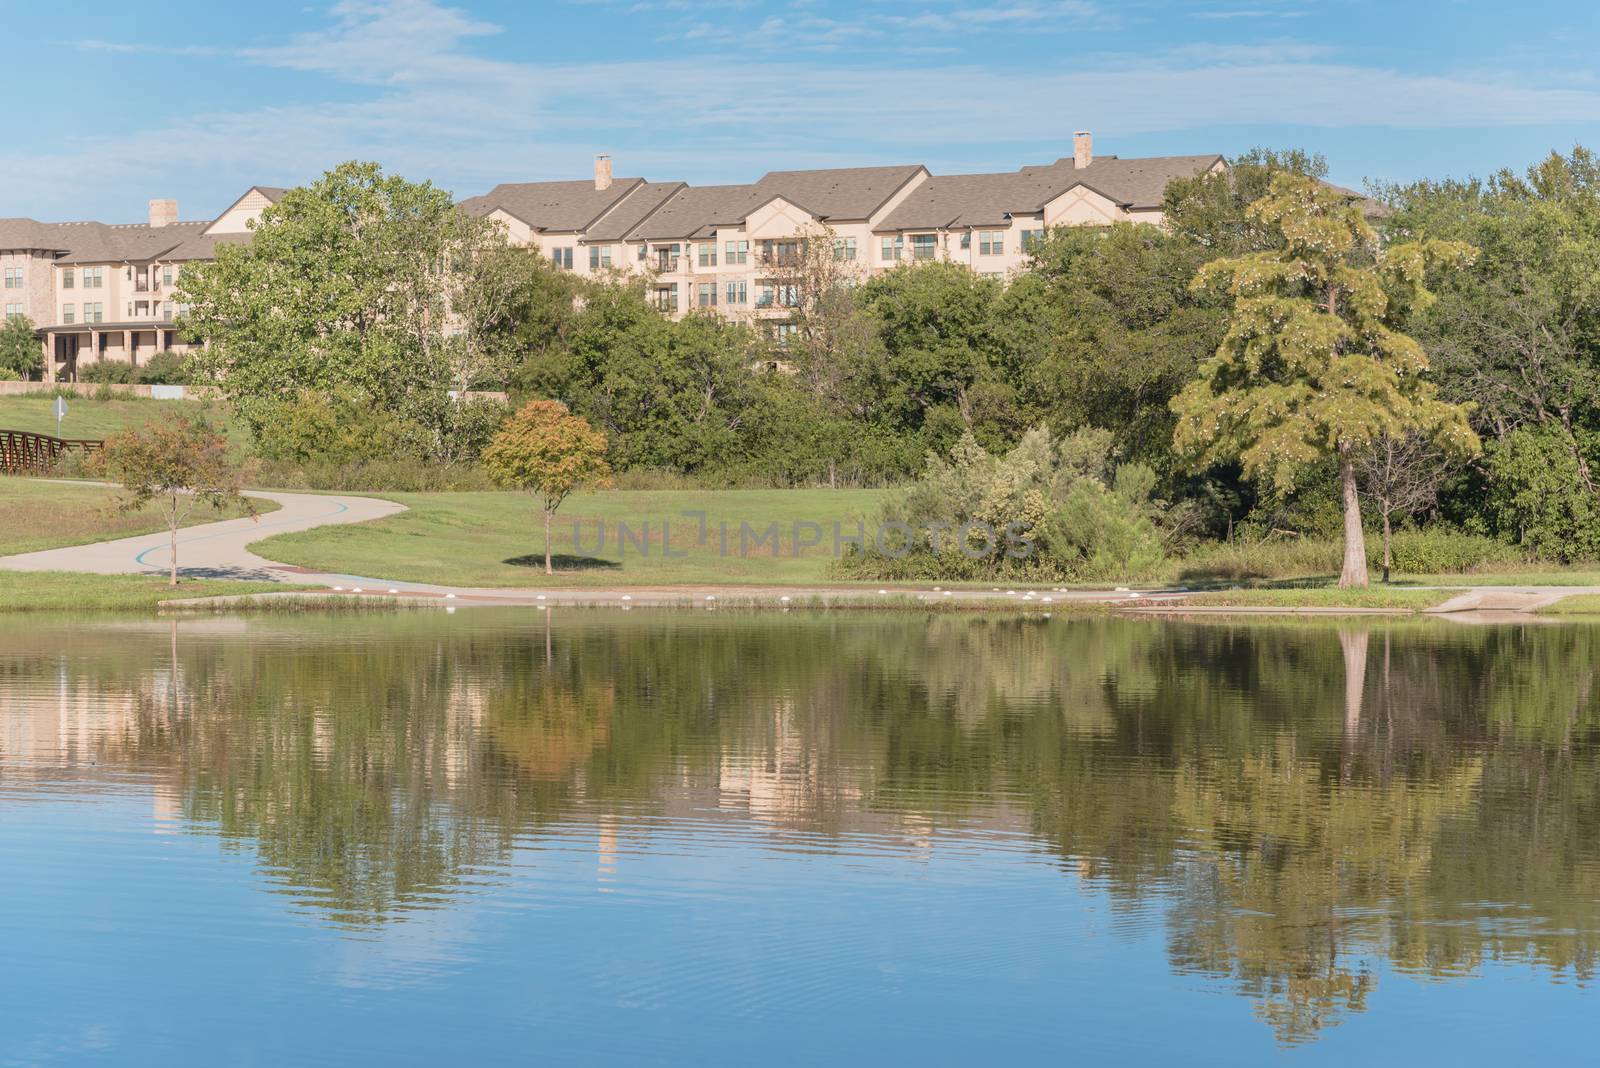 Multistory apartment complex near city park with pathway, lake and cloud sky reflection. Natural rental area near Dallas, Texas, USA